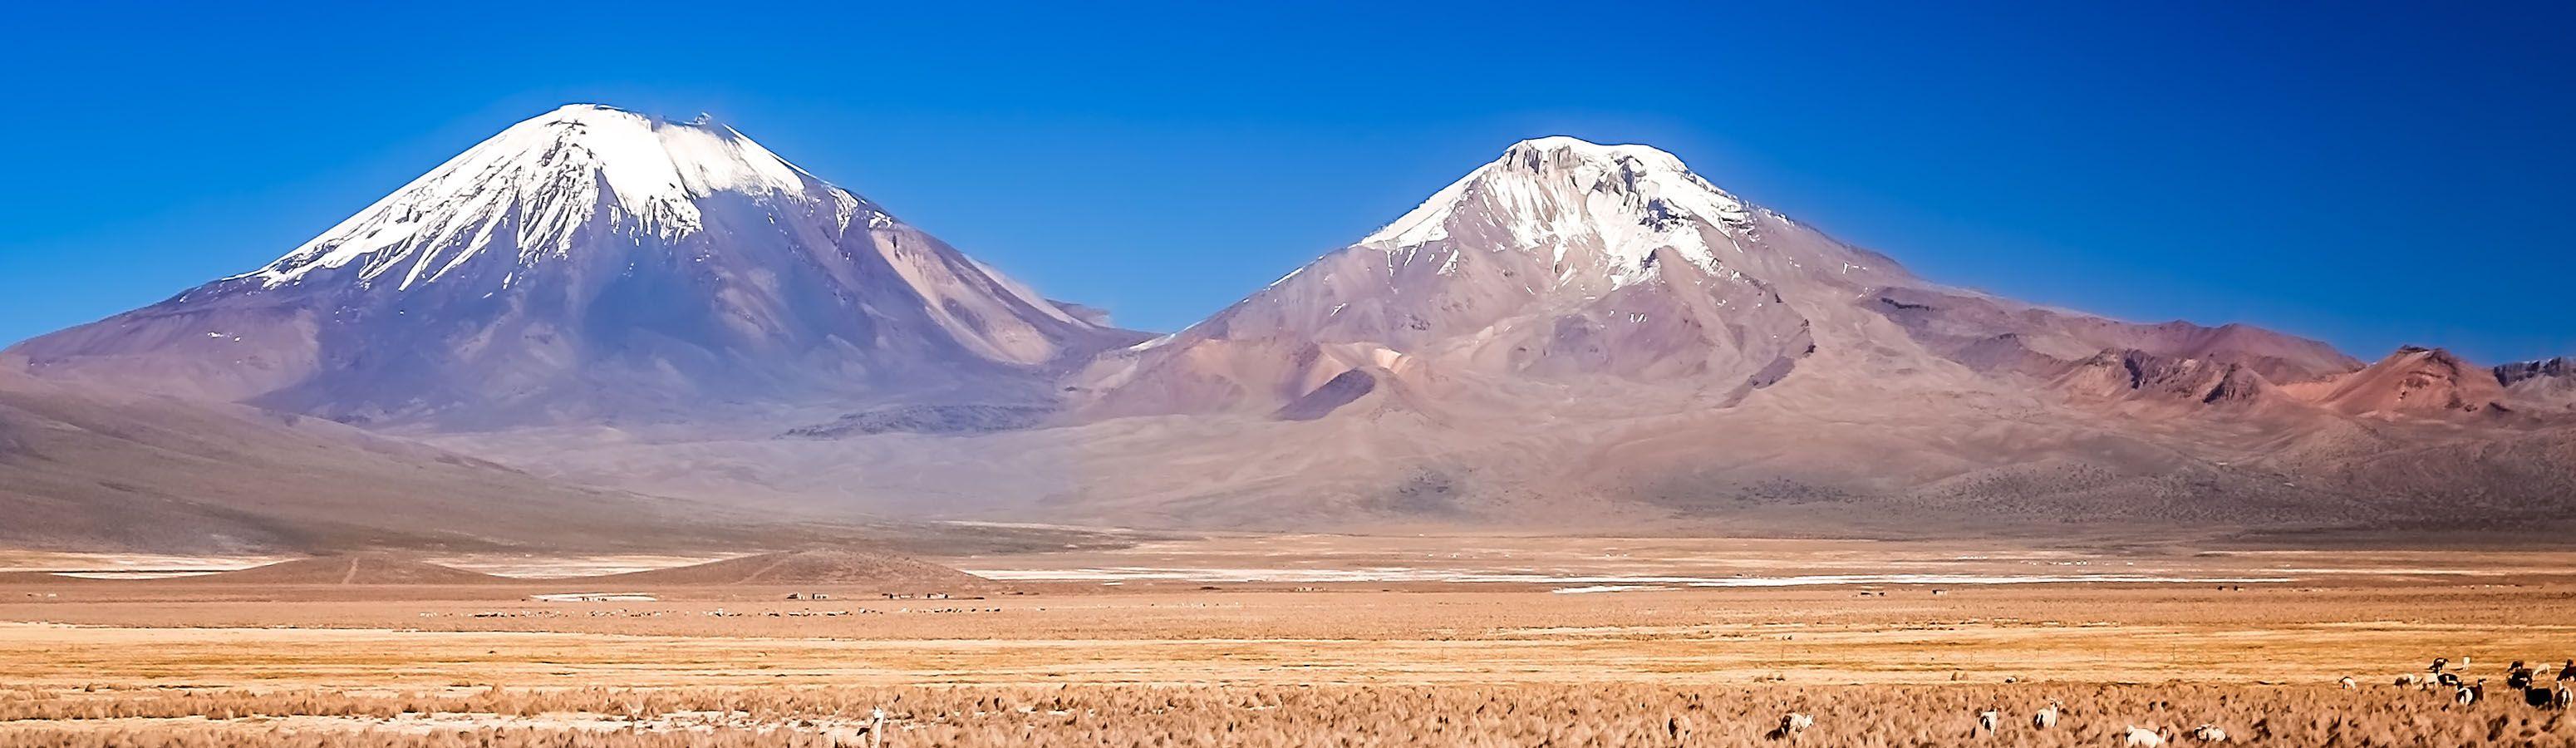 Pack your cats and warm sleeping bag! A Bolivian six thousand is waiting for your climb